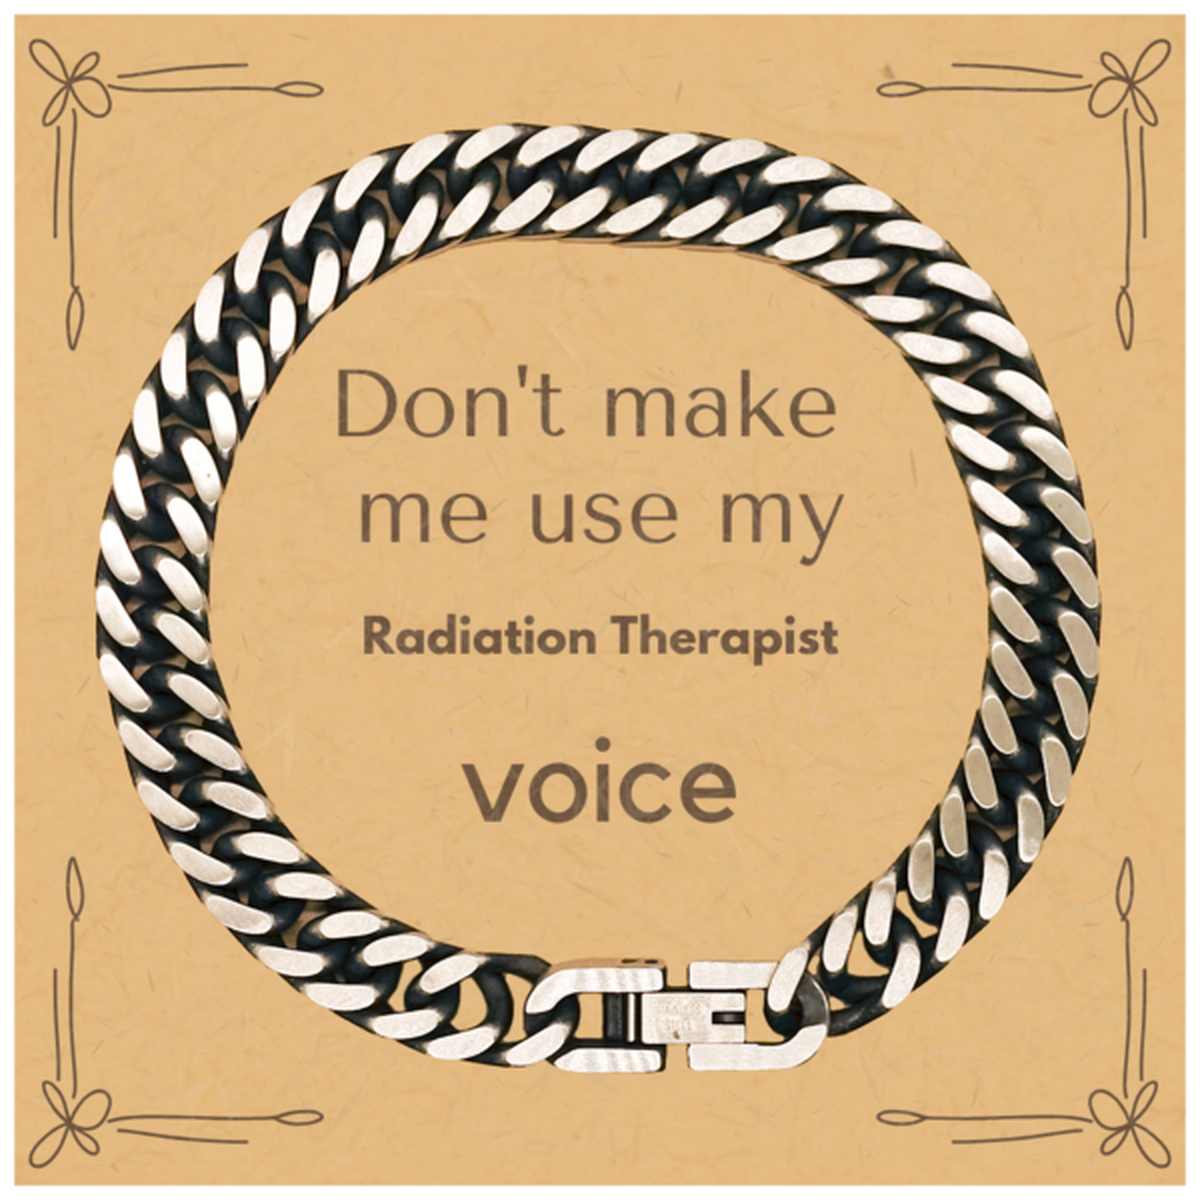 Don't make me use my Radiation Therapist voice, Sarcasm Radiation Therapist Card Gifts, Christmas Radiation Therapist Cuban Link Chain Bracelet Birthday Unique Gifts For Radiation Therapist Coworkers, Men, Women, Colleague, Friends